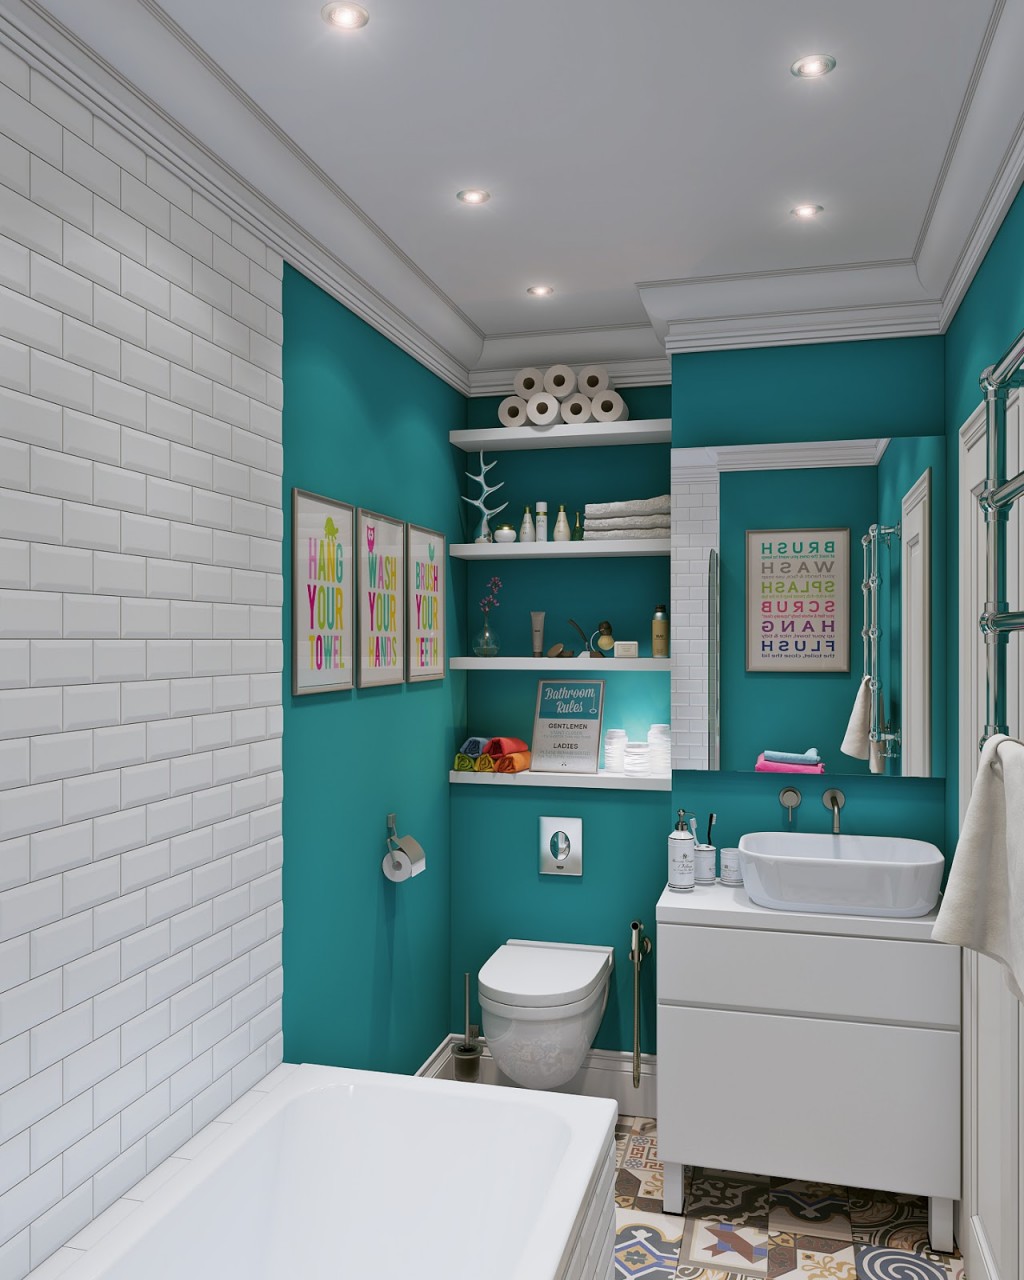 Adorable blue and white bathroom